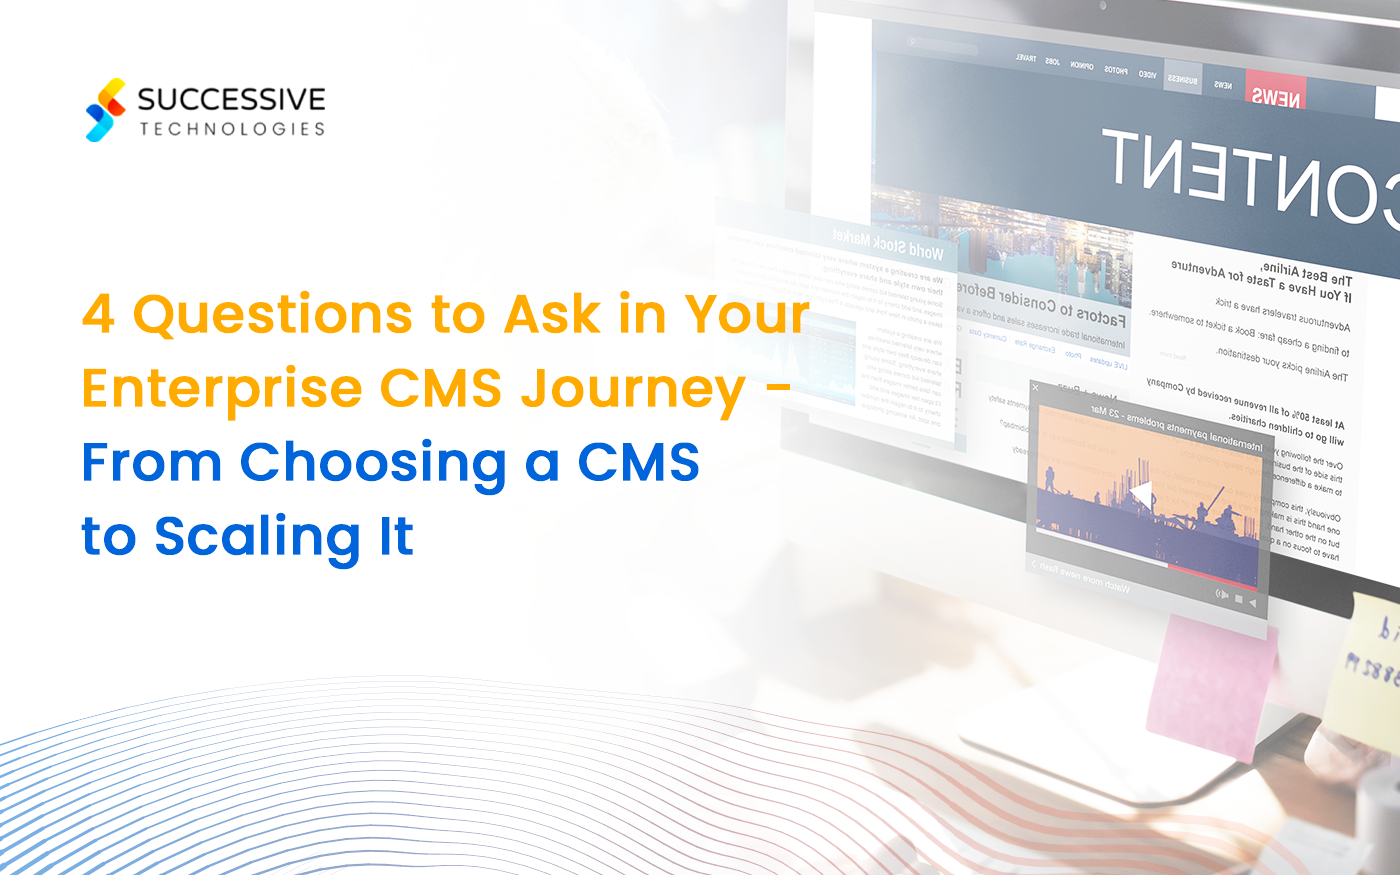 4 Questions to Ask in Your Enterprise CMS Journey – From Choosing a CMS to Scaling It